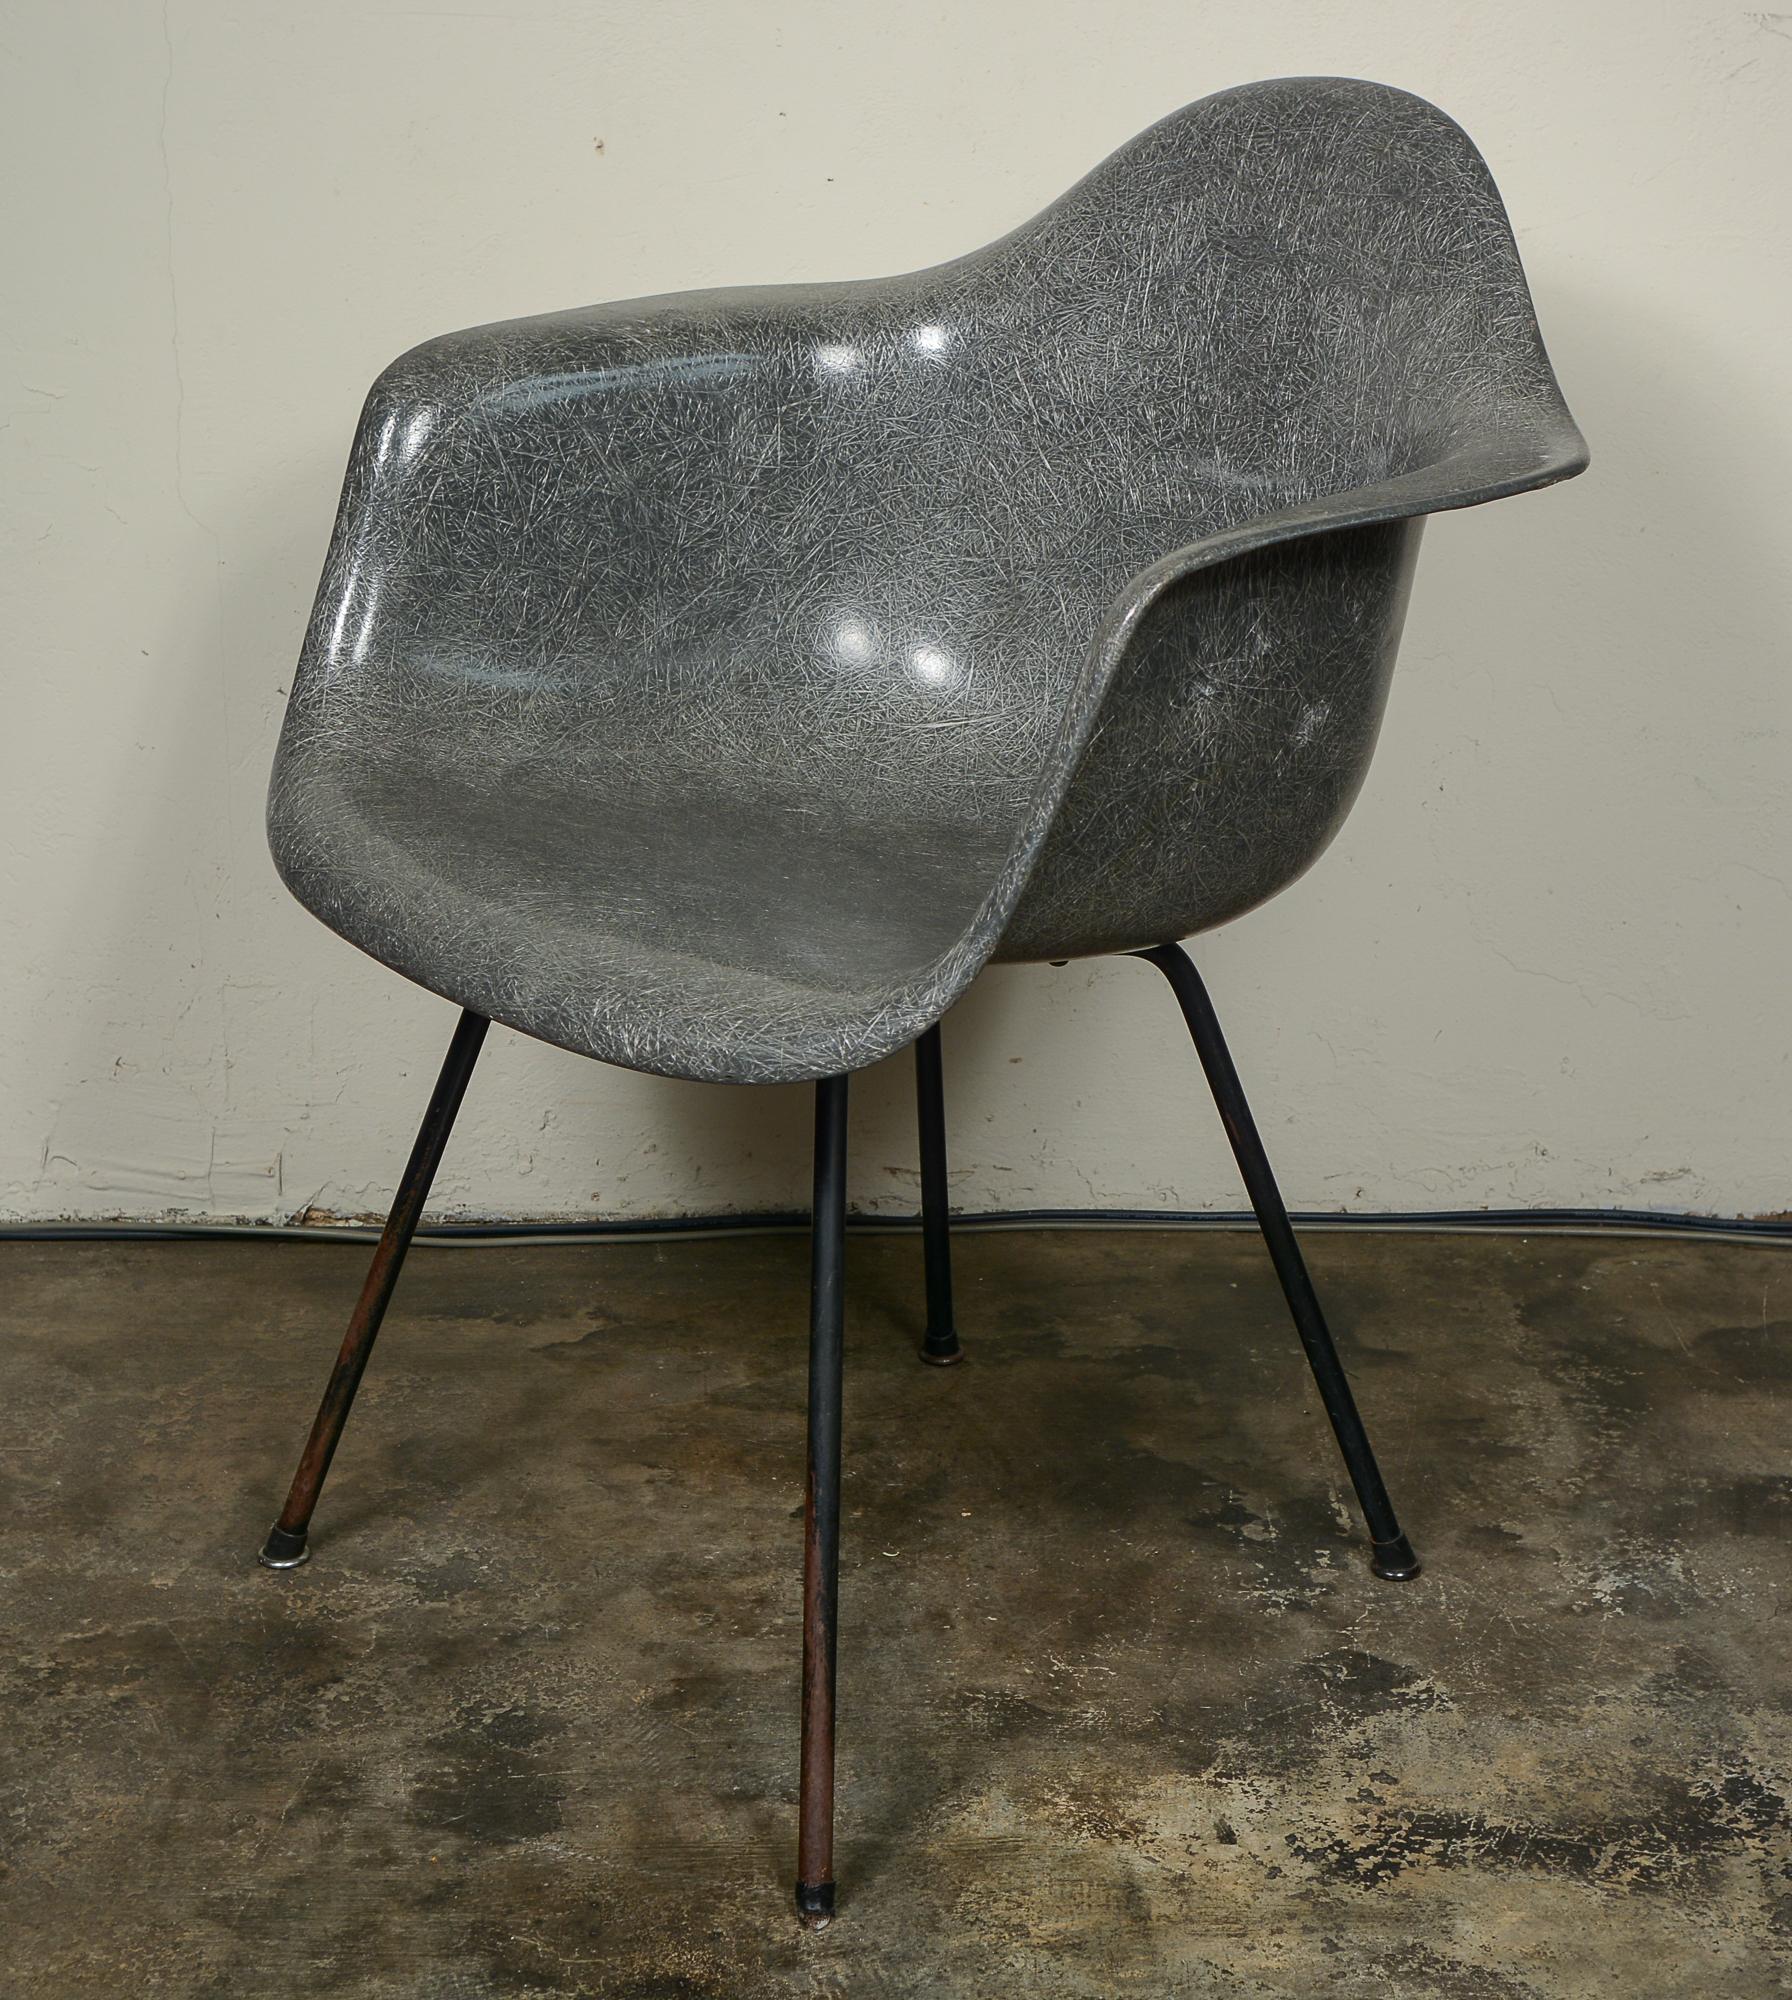 Second generation Zenith fiberglass armchair by Charles and Ray Eames. This chair is elephant hide grey. The chair is missing one glide. The screws are likely not original. There are a couple of scratches, one deeper one on the seat. There are minor